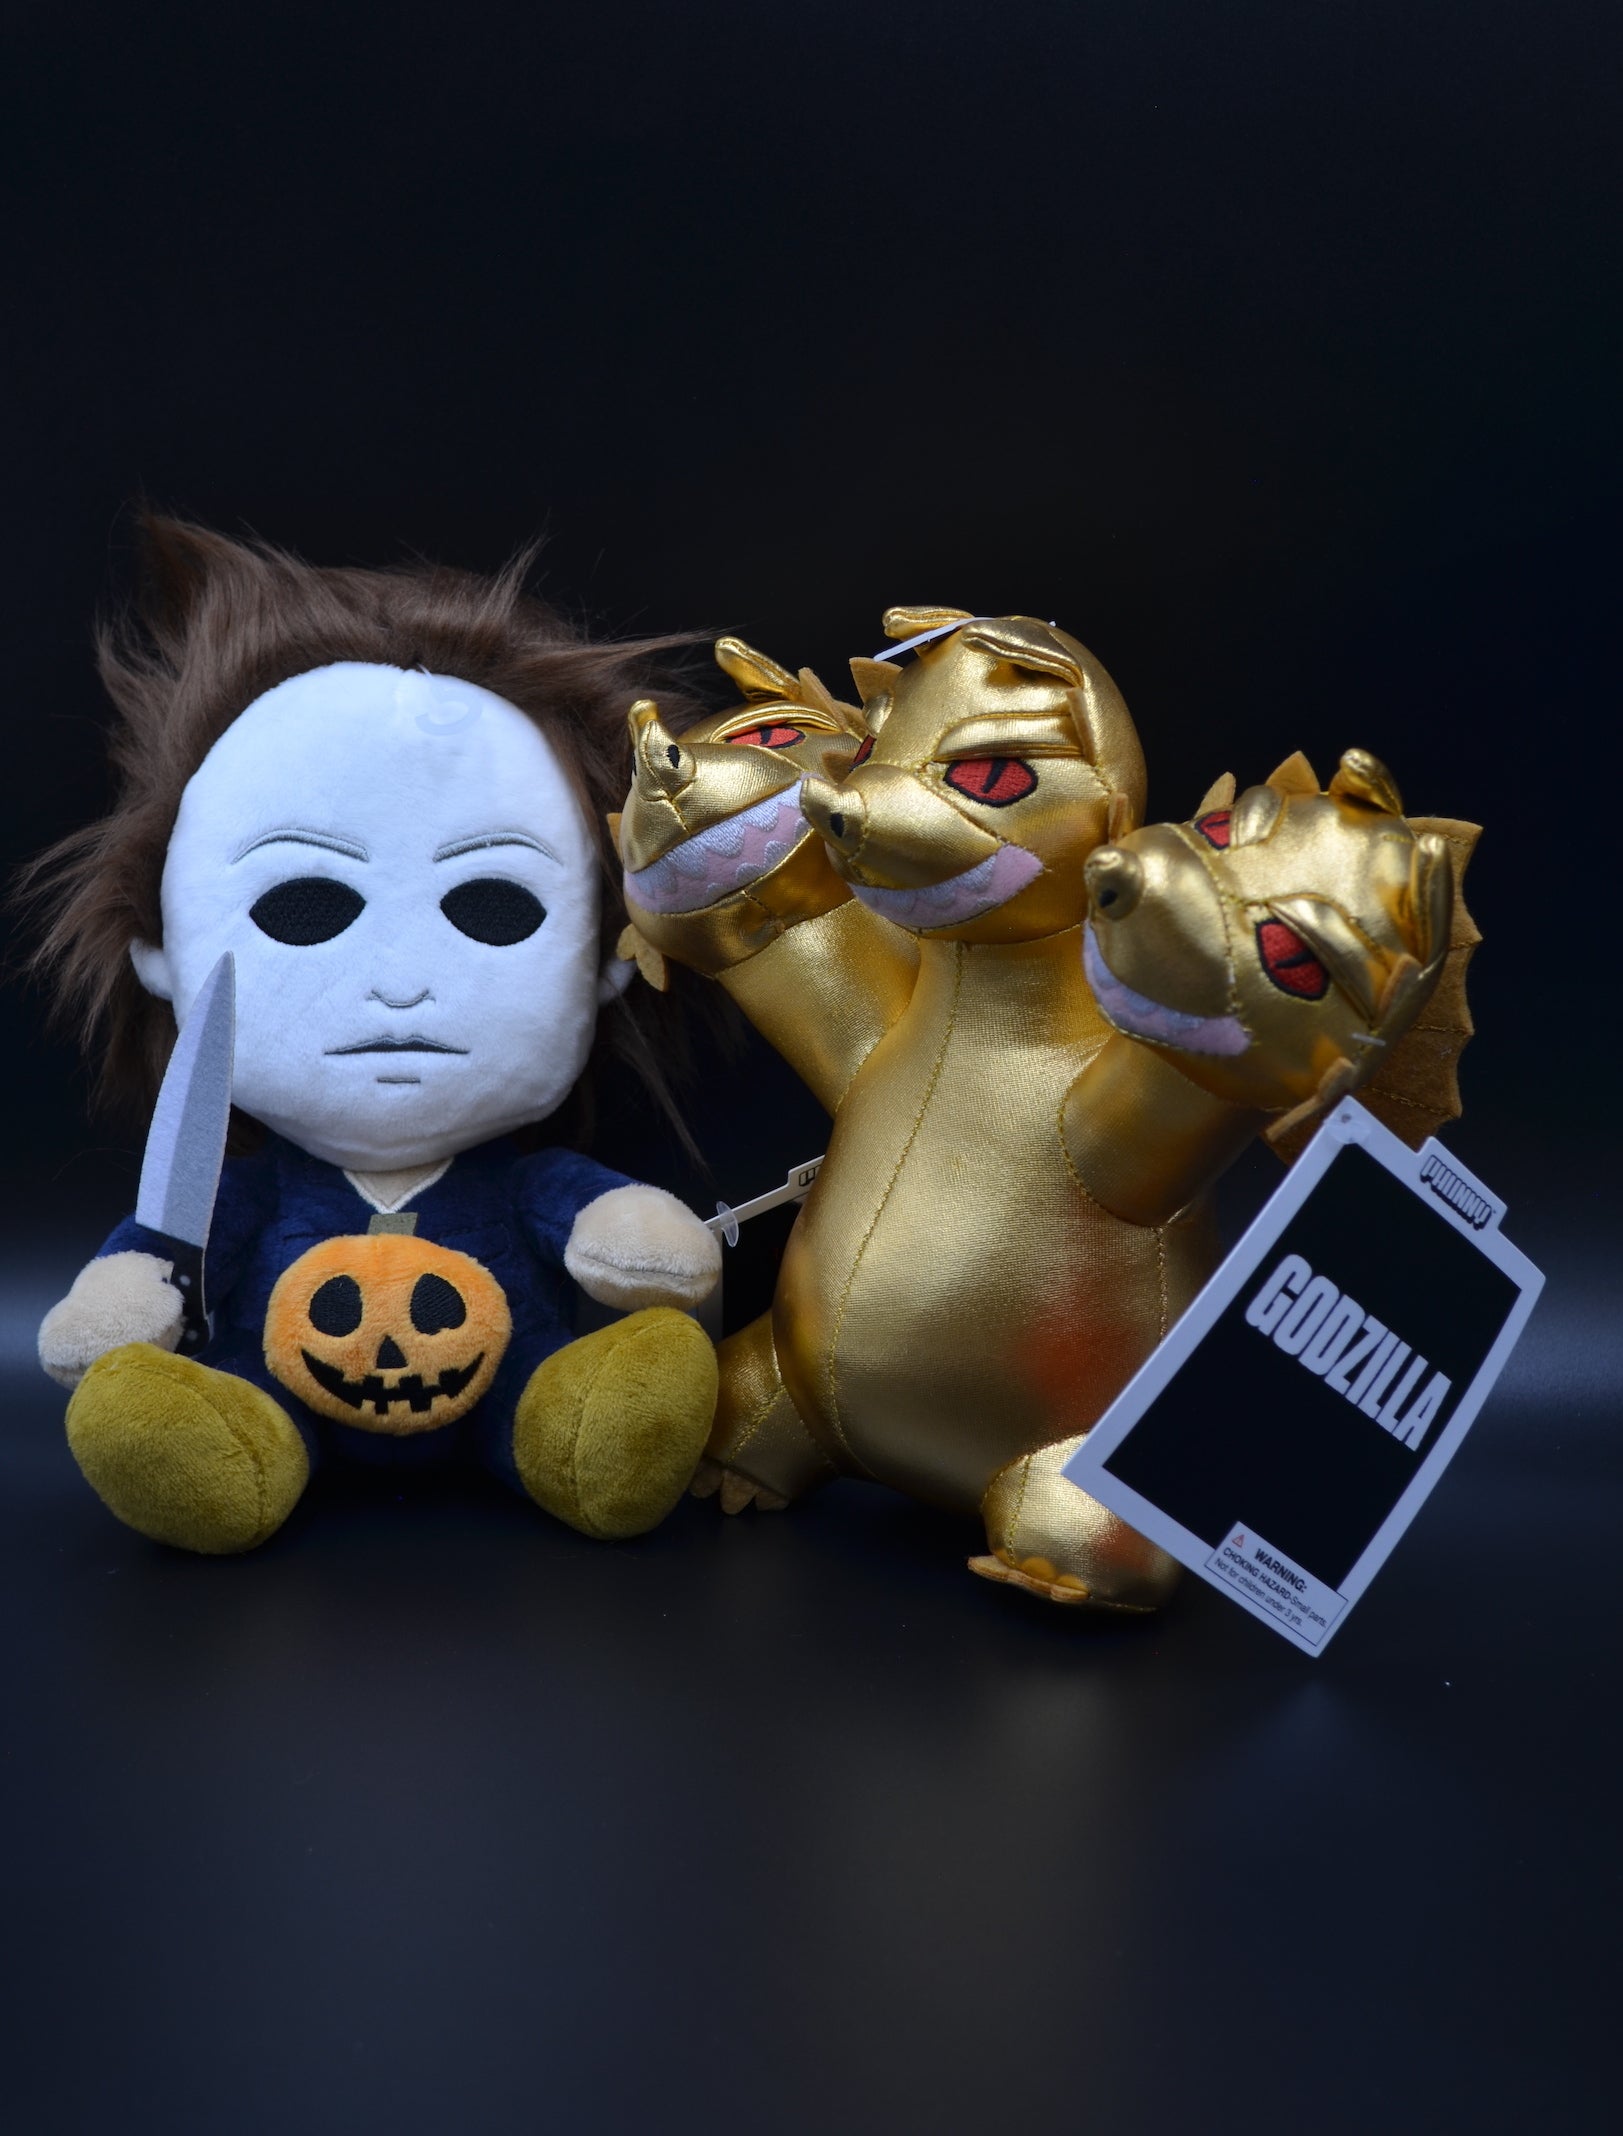 This is a Michael Myers Halloween Phunny plush stuffed